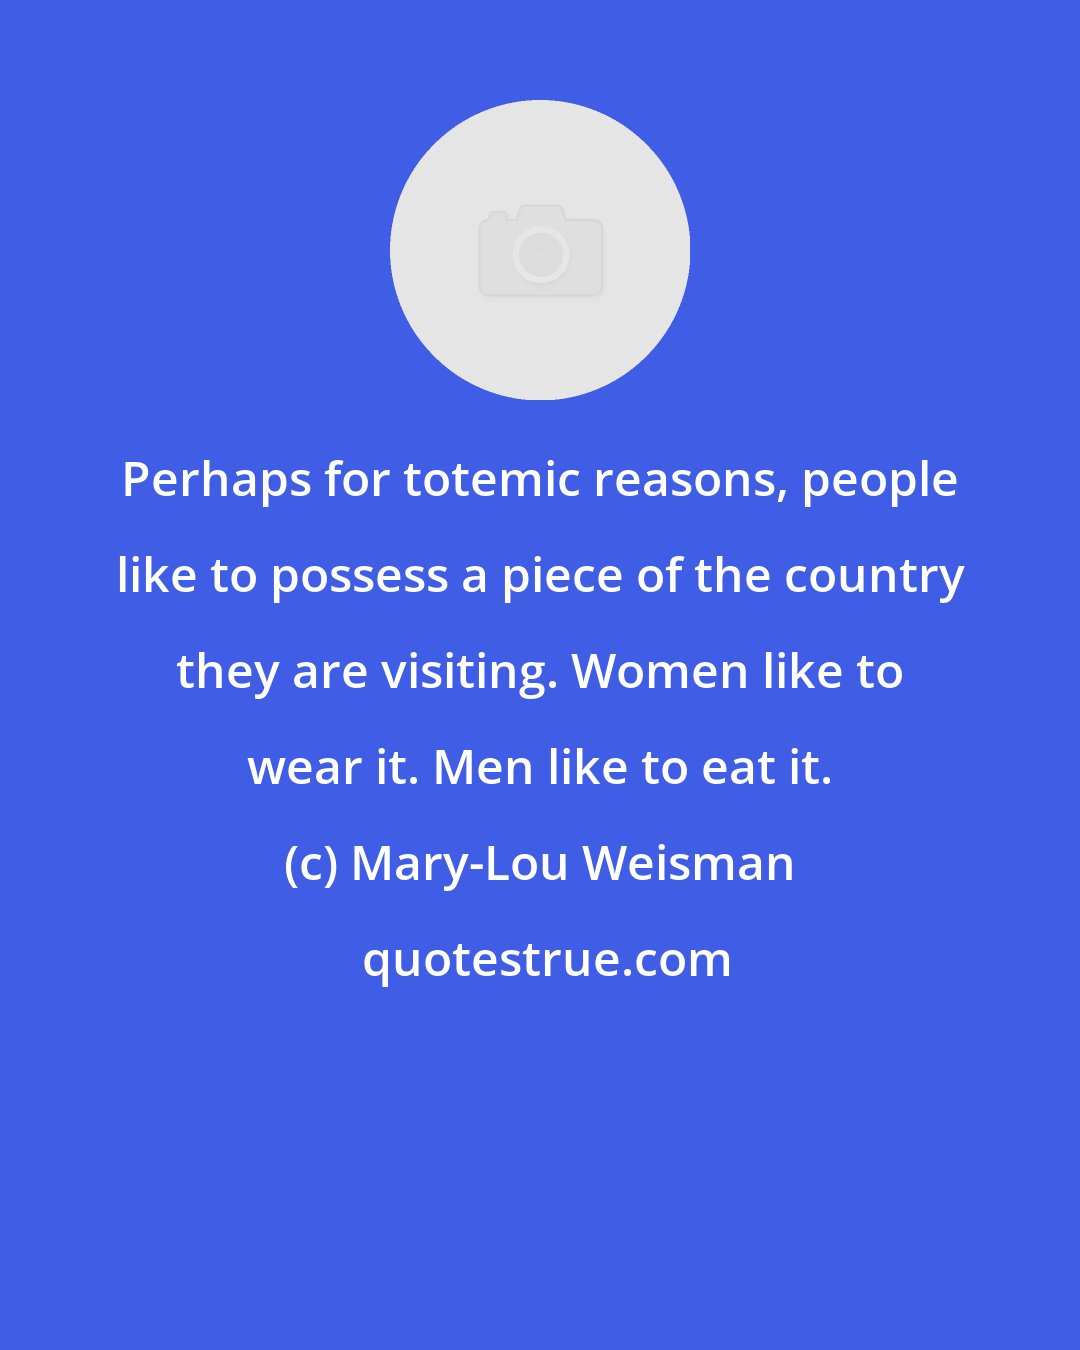 Mary-Lou Weisman: Perhaps for totemic reasons, people like to possess a piece of the country they are visiting. Women like to wear it. Men like to eat it.